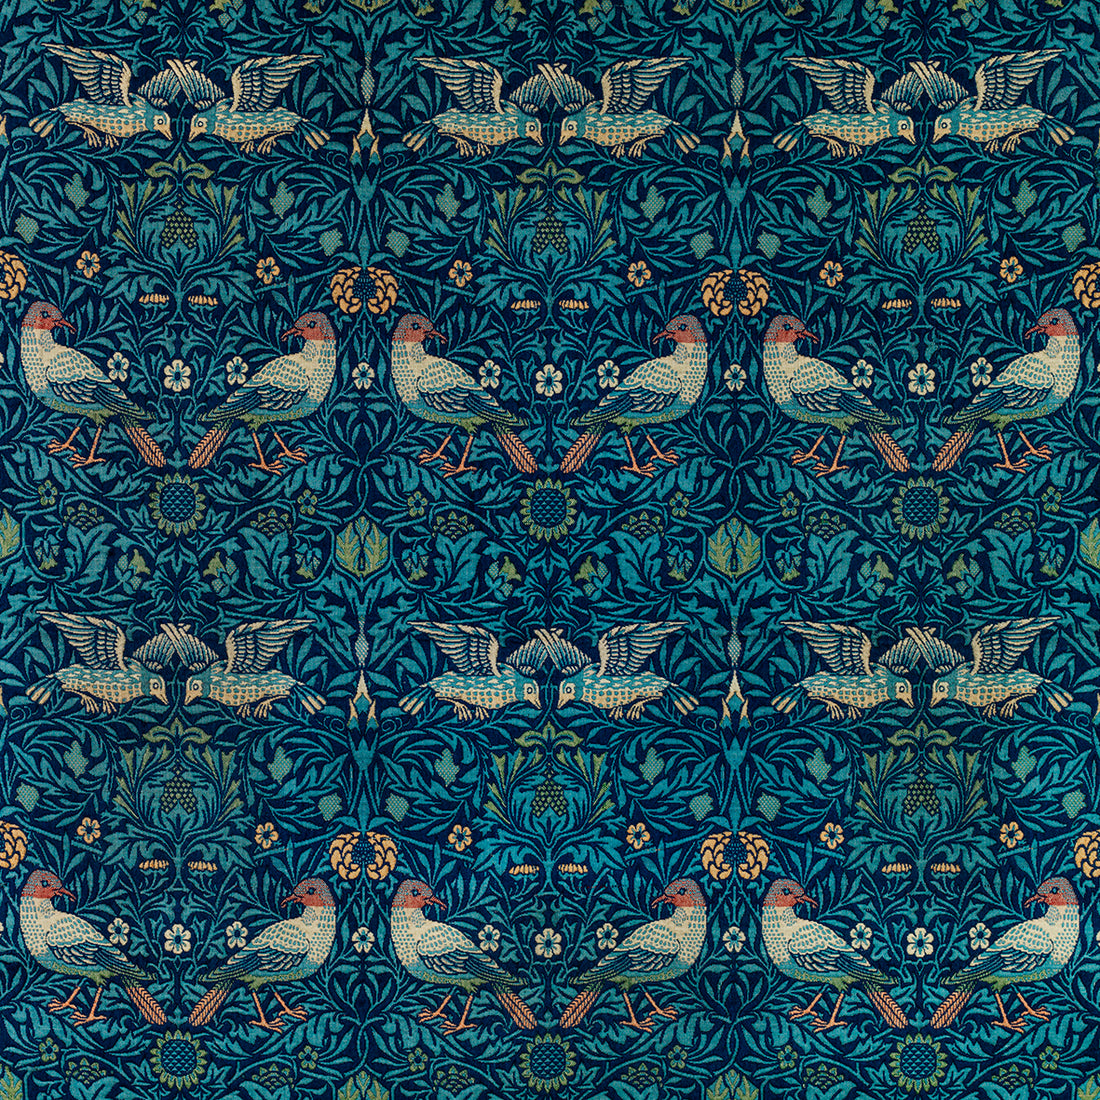 rediscovering-the-elegance-of-bluebird-collections-celebrating-the-artistry-of-william-morris